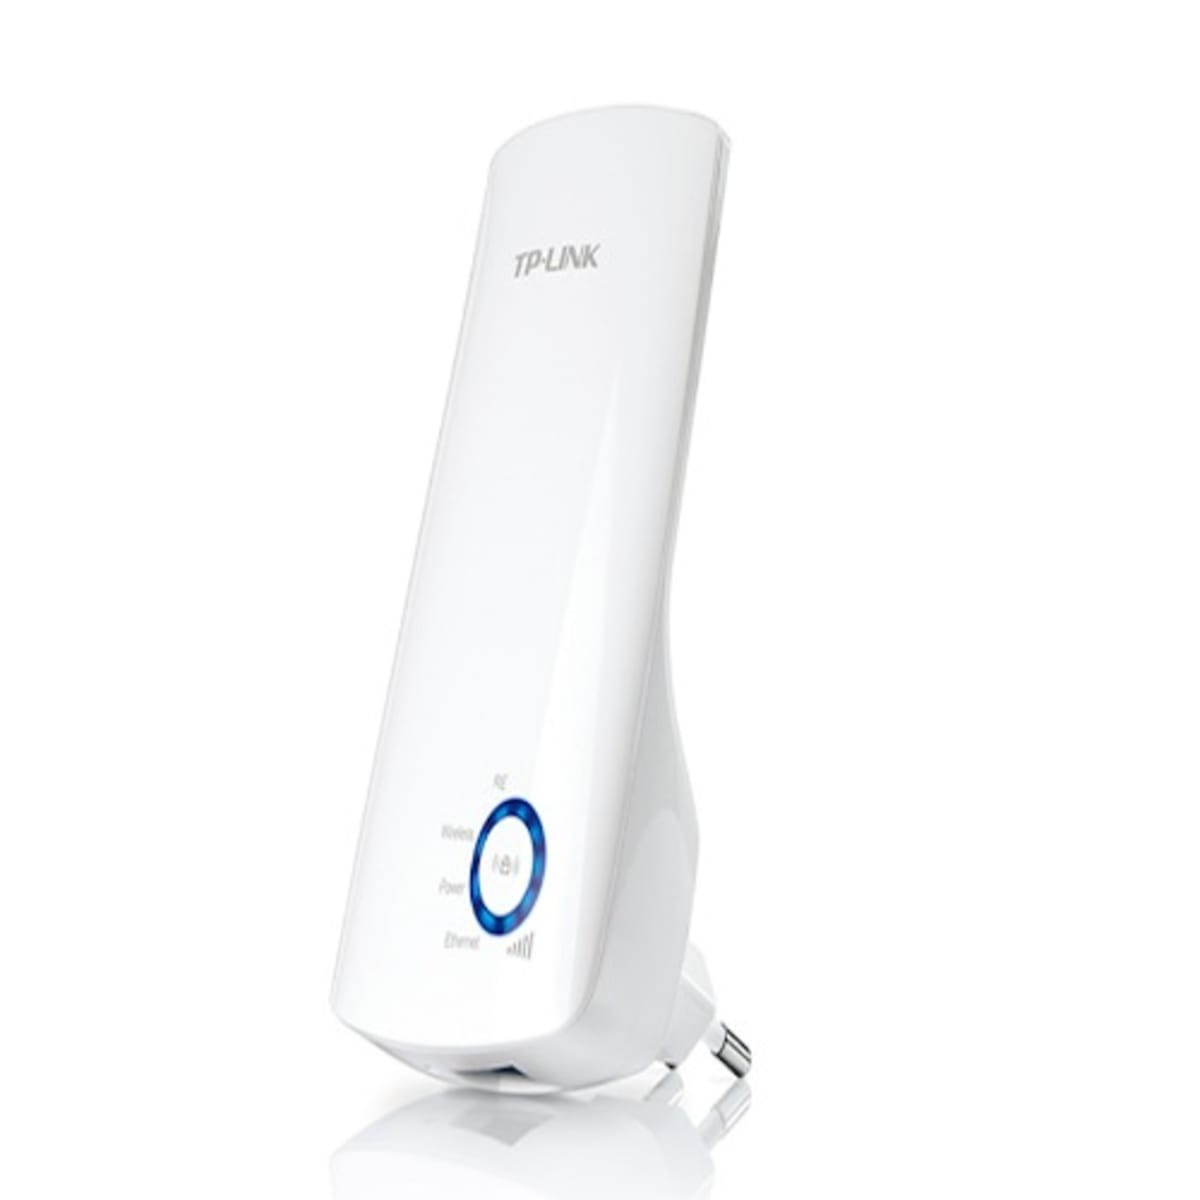 Extensor Repetidor Wifi Universal 300mbps Tl-wa850re Tp-link